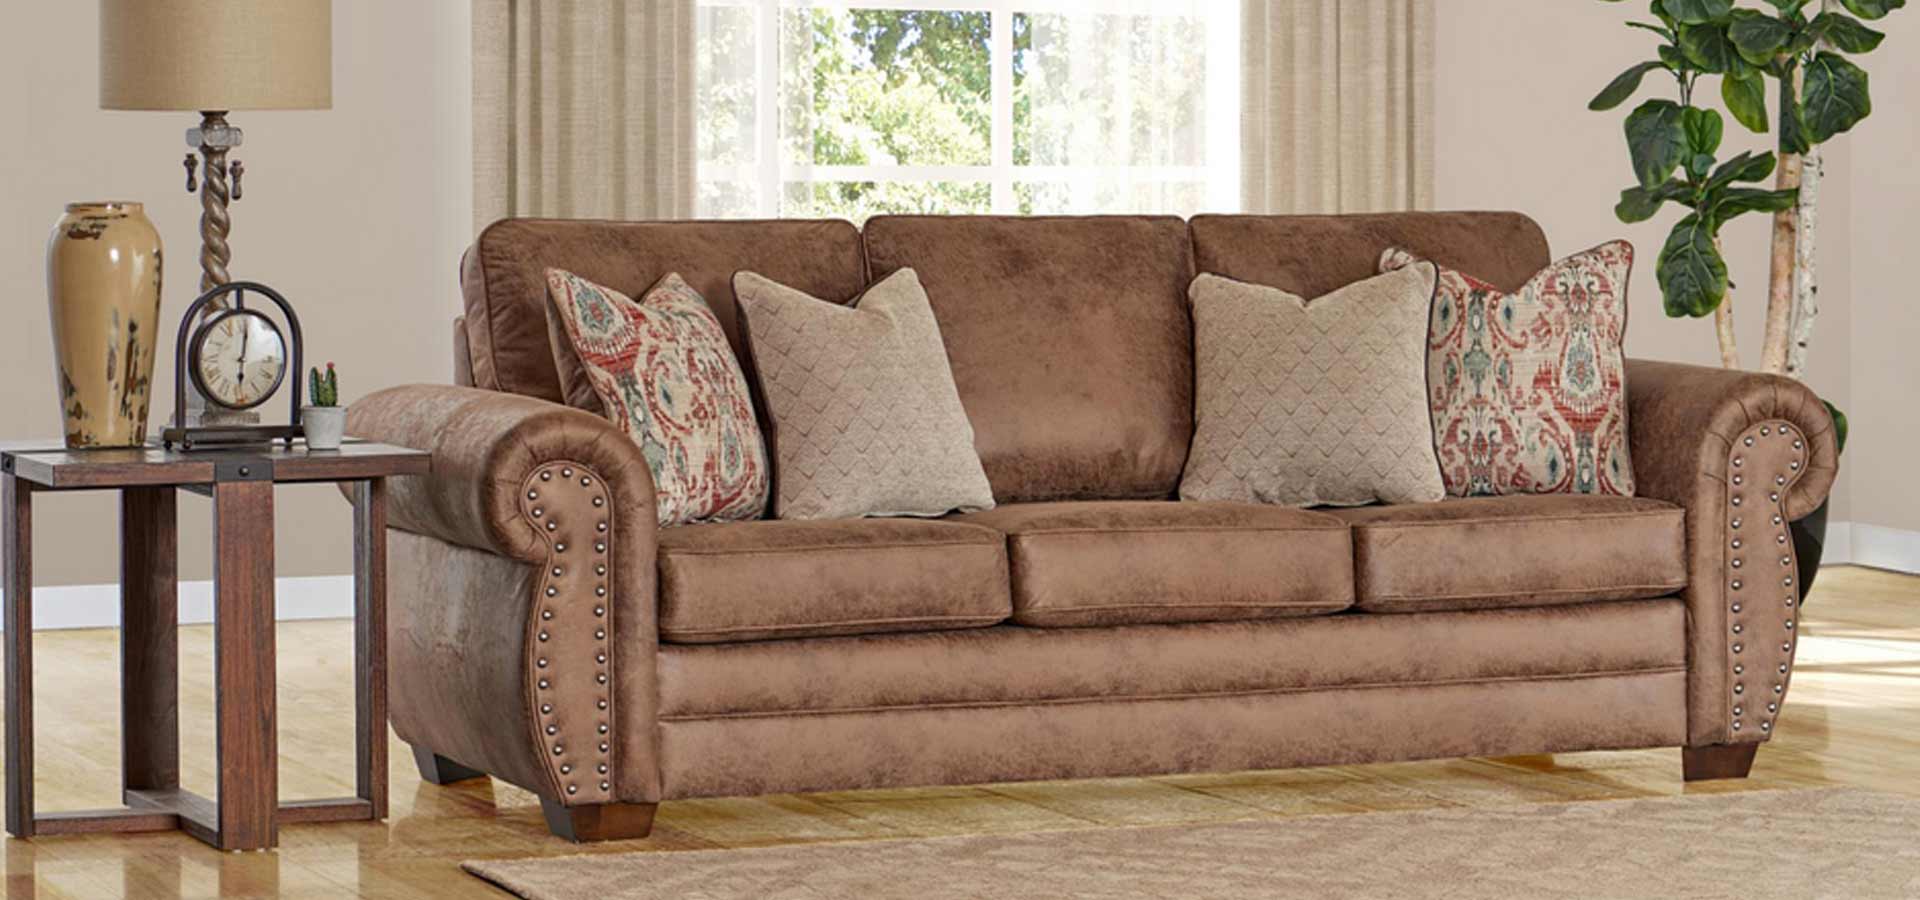 A beautiful traditional-style sofa & other furniture in a living room much like in Lubbock, Texas.